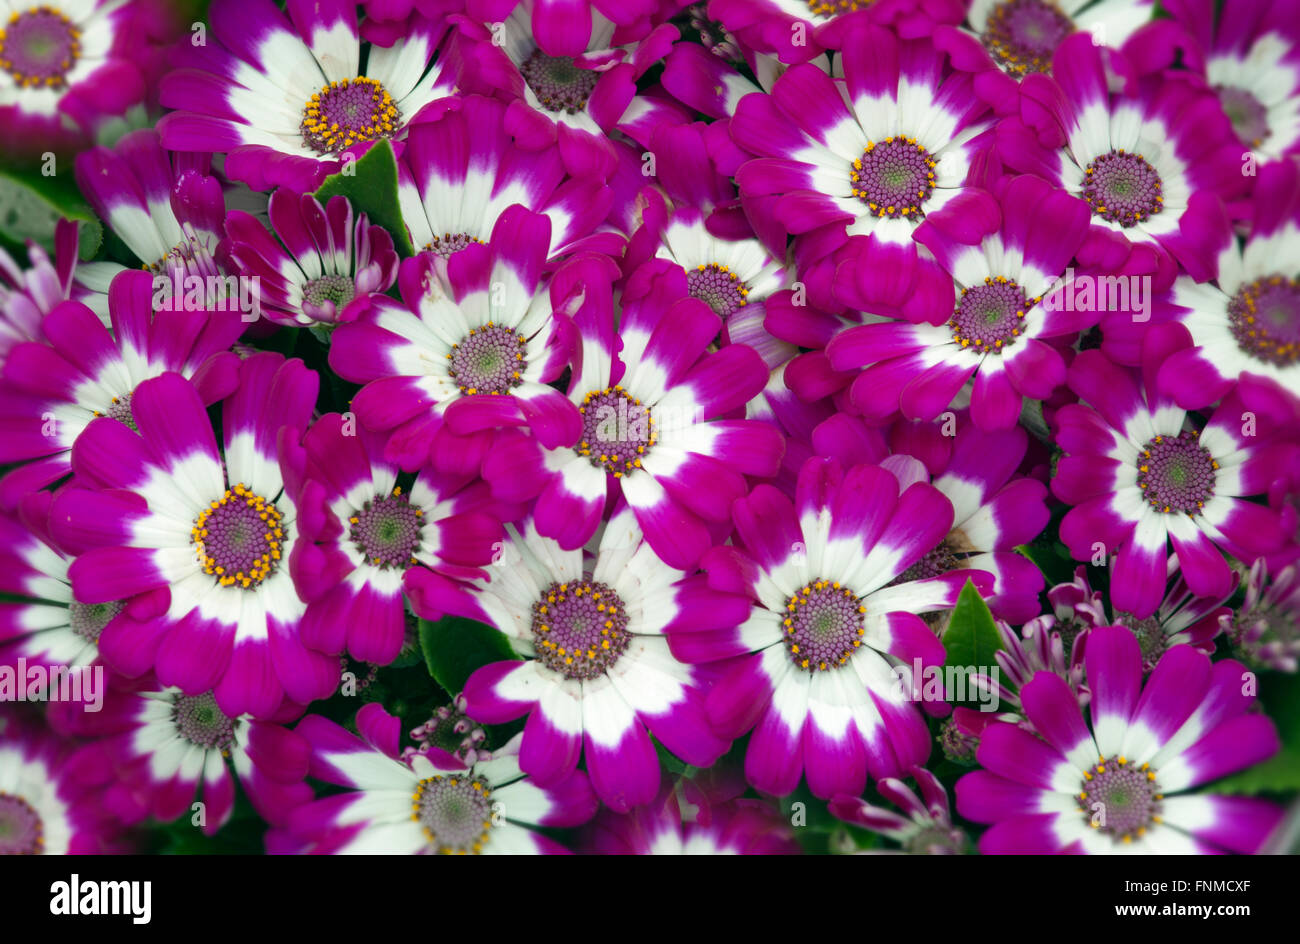 Cineraria genus of flowering plants in the sunflower family Stock Photo